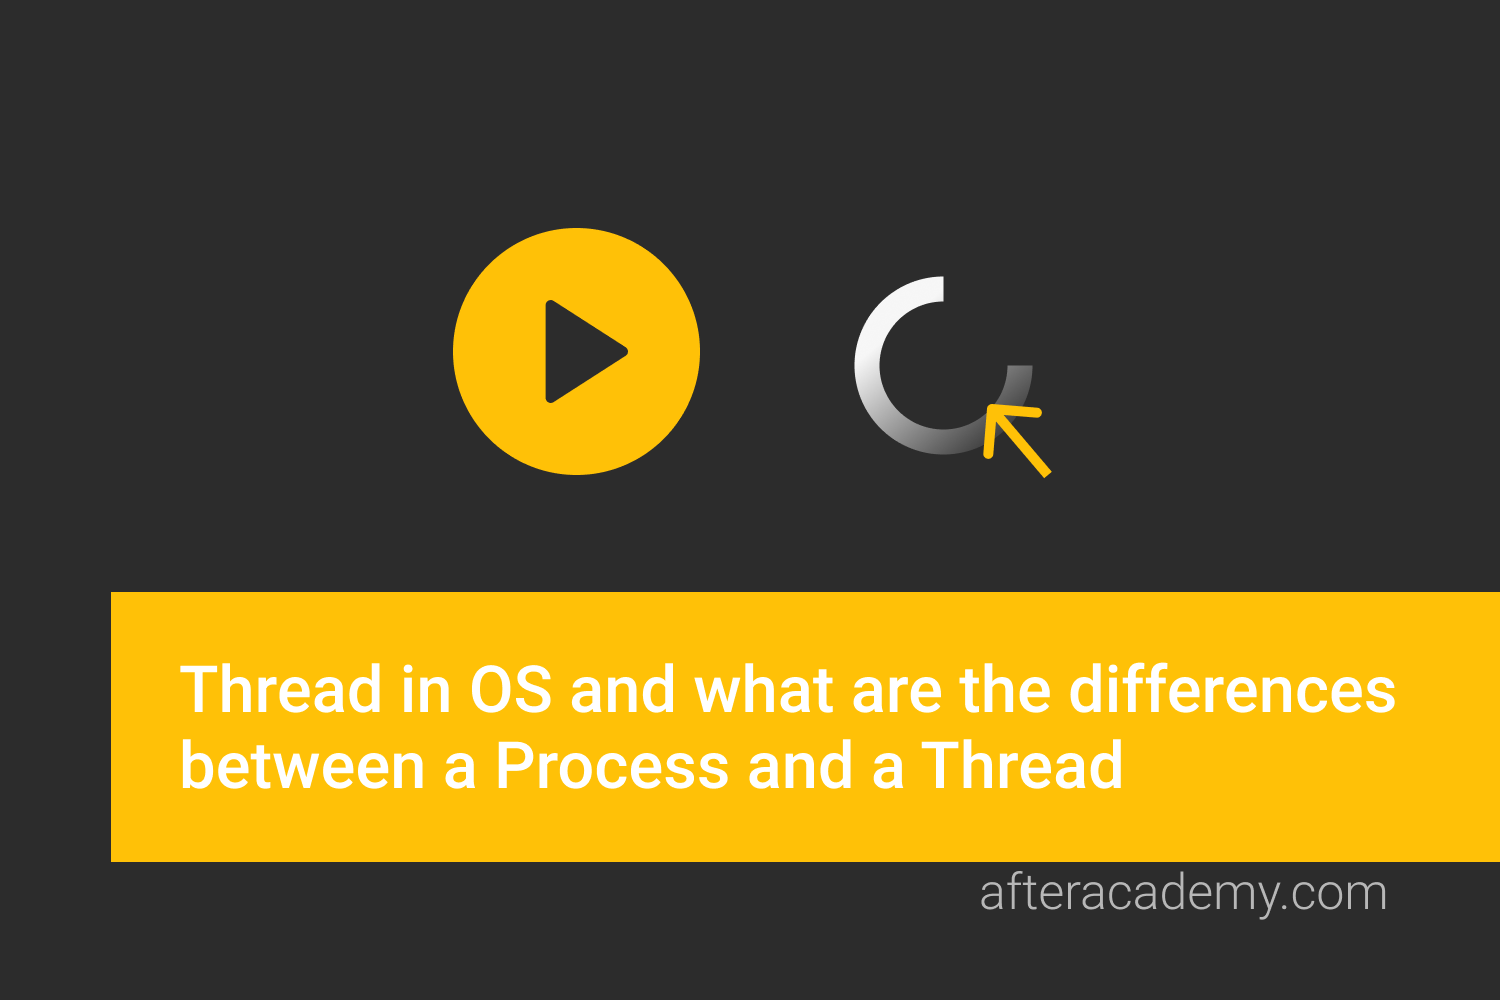 What is a Thread in OS and what are the differences between a Process and a Thread?